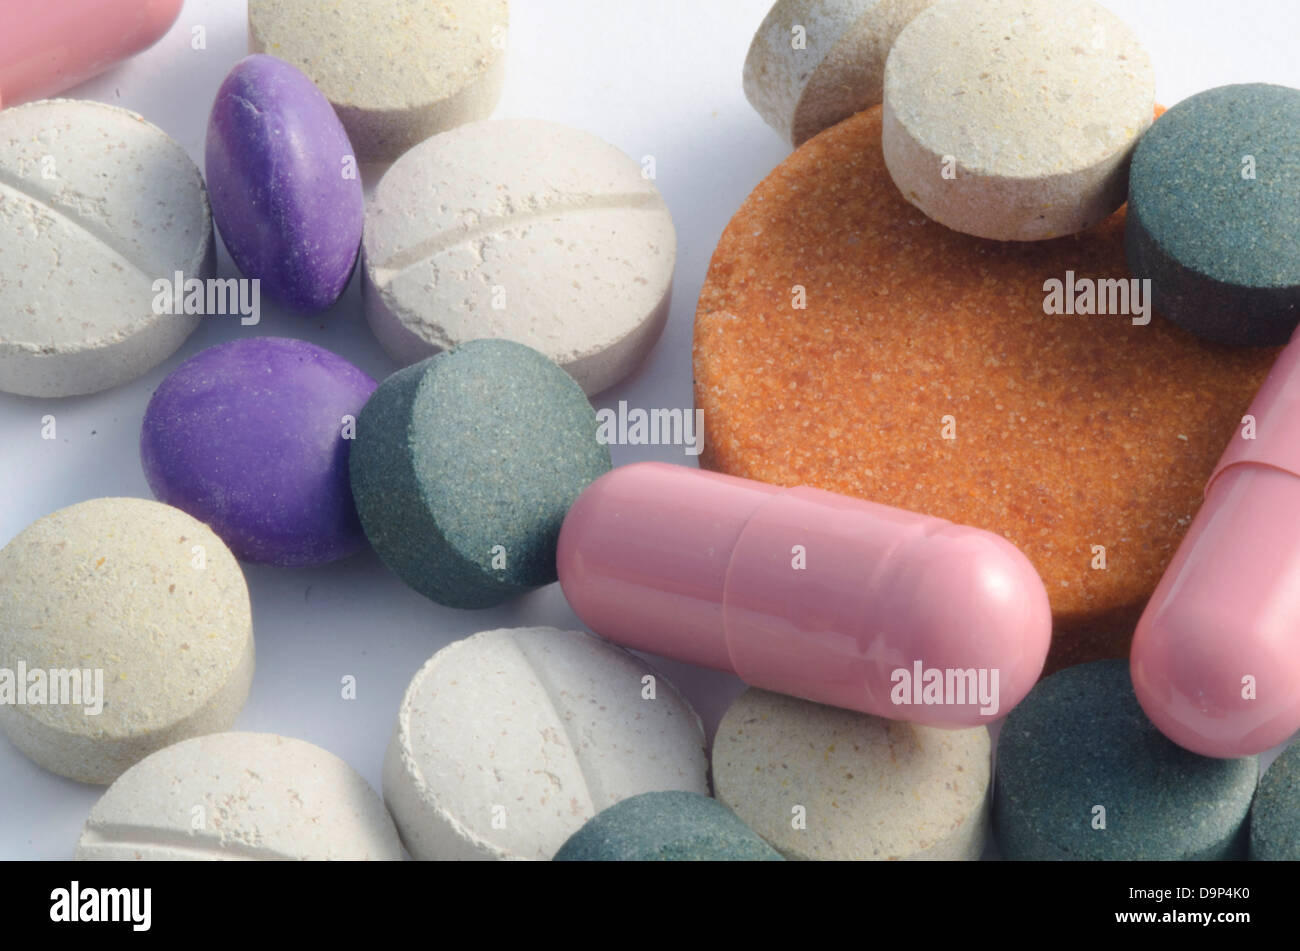 Medical health remedies, a pile of pills and capsules medication Stock Photo